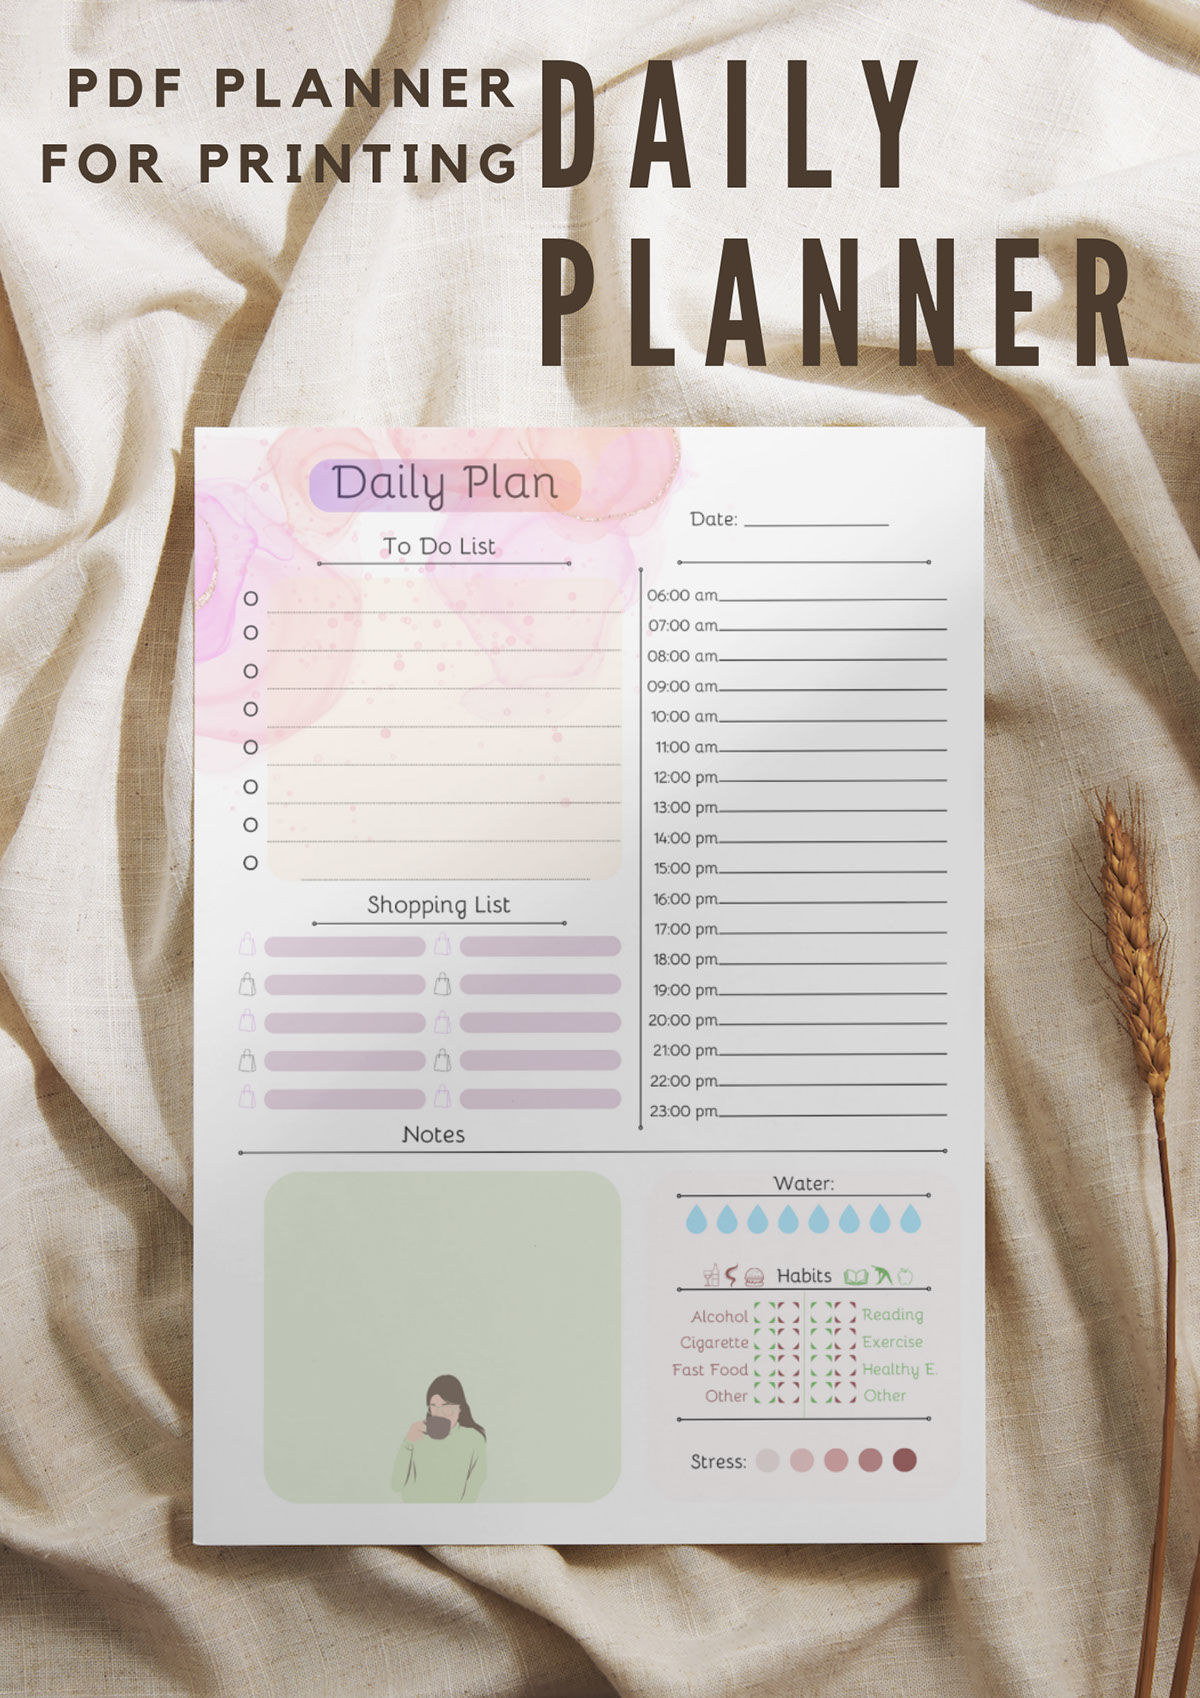 Daily Planner rendition image